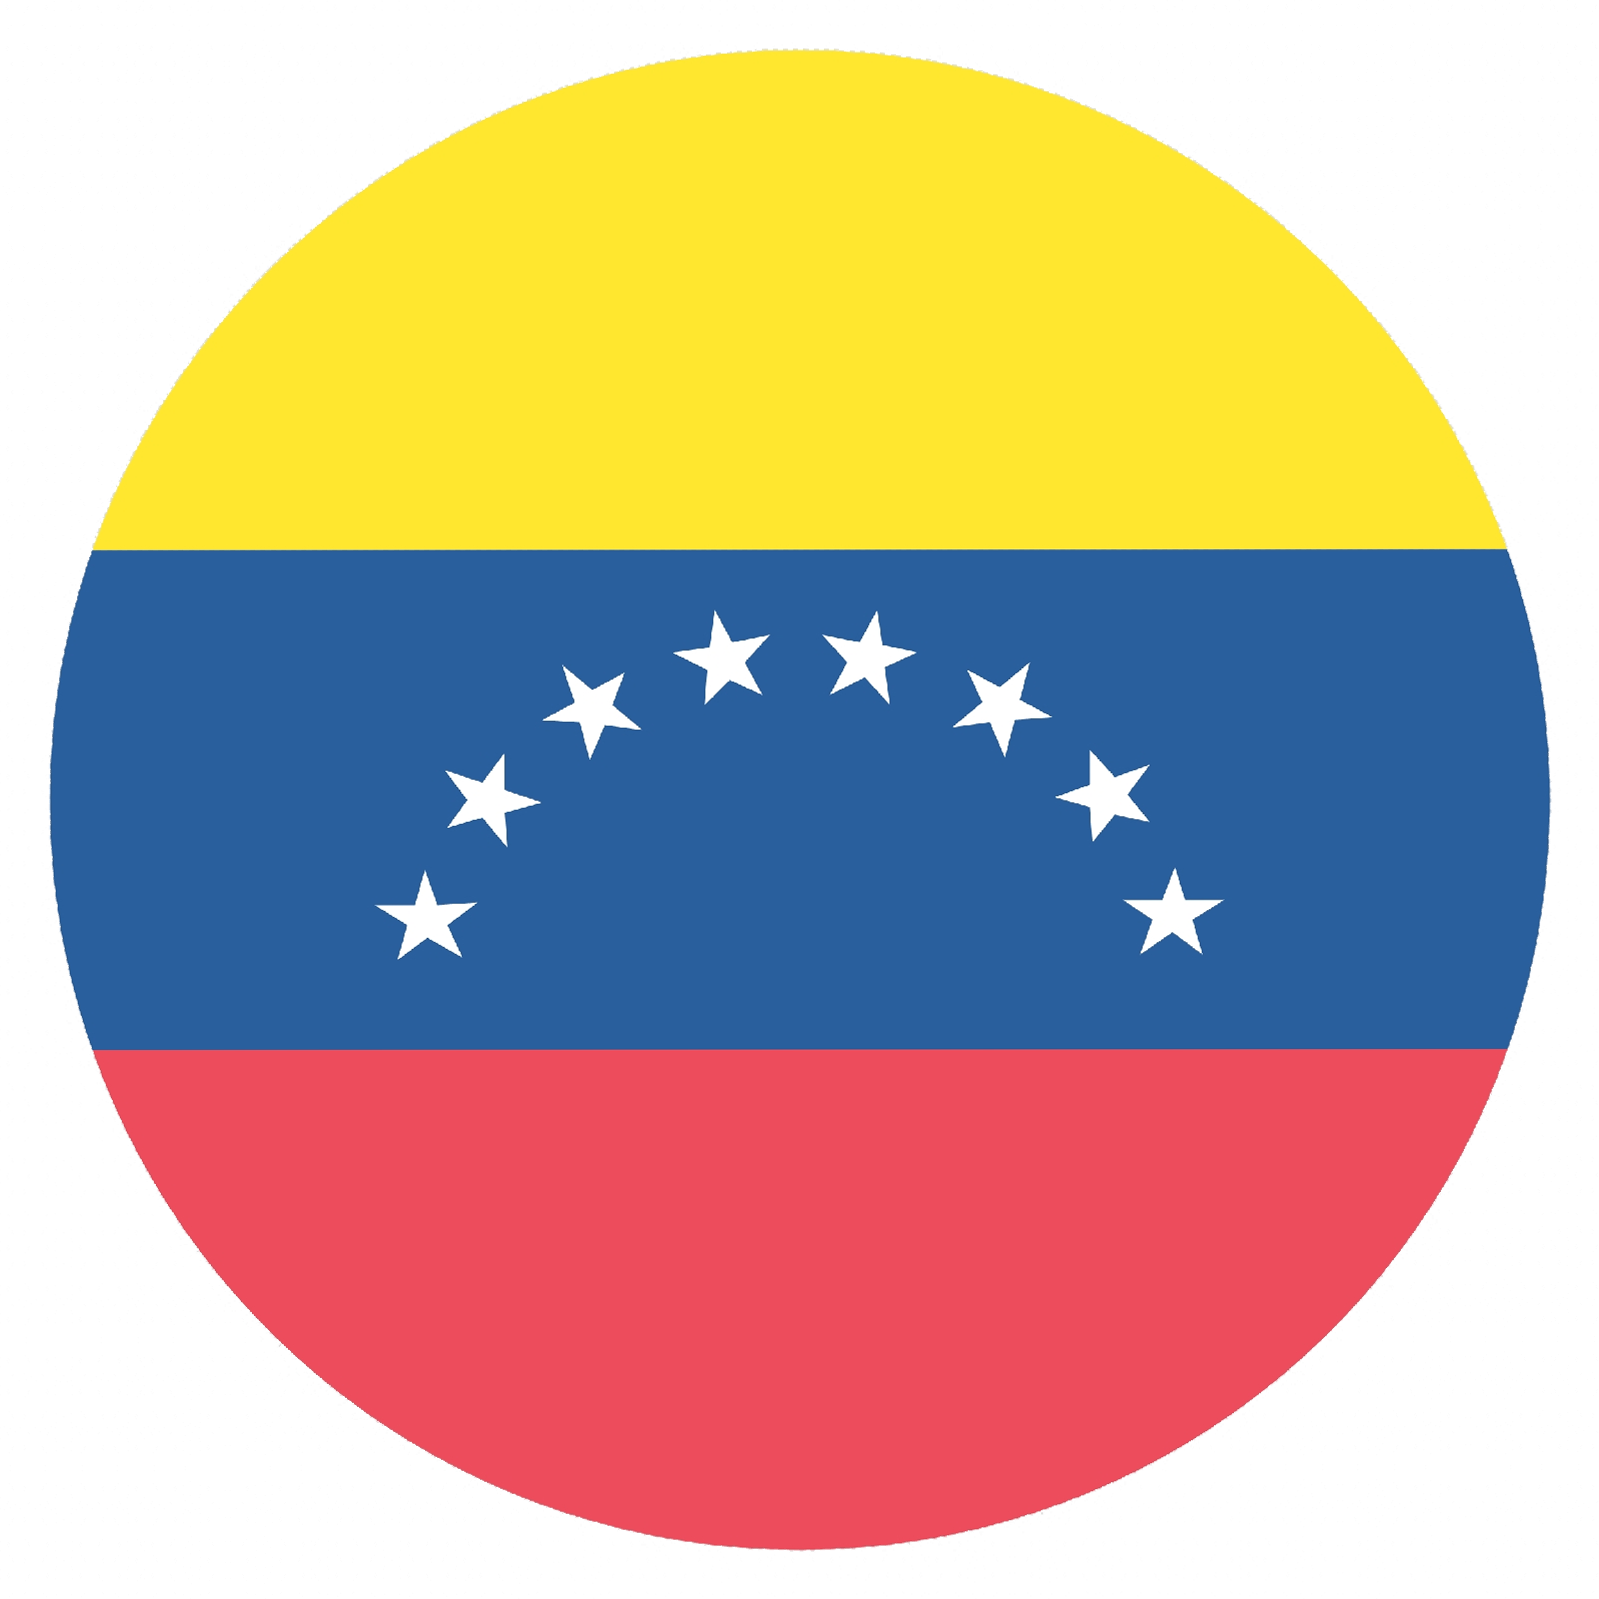 The Venezuelan flag, adorned with vibrant yellow, blue, and red stripes, is a symbol of the nation's history and aspirations.